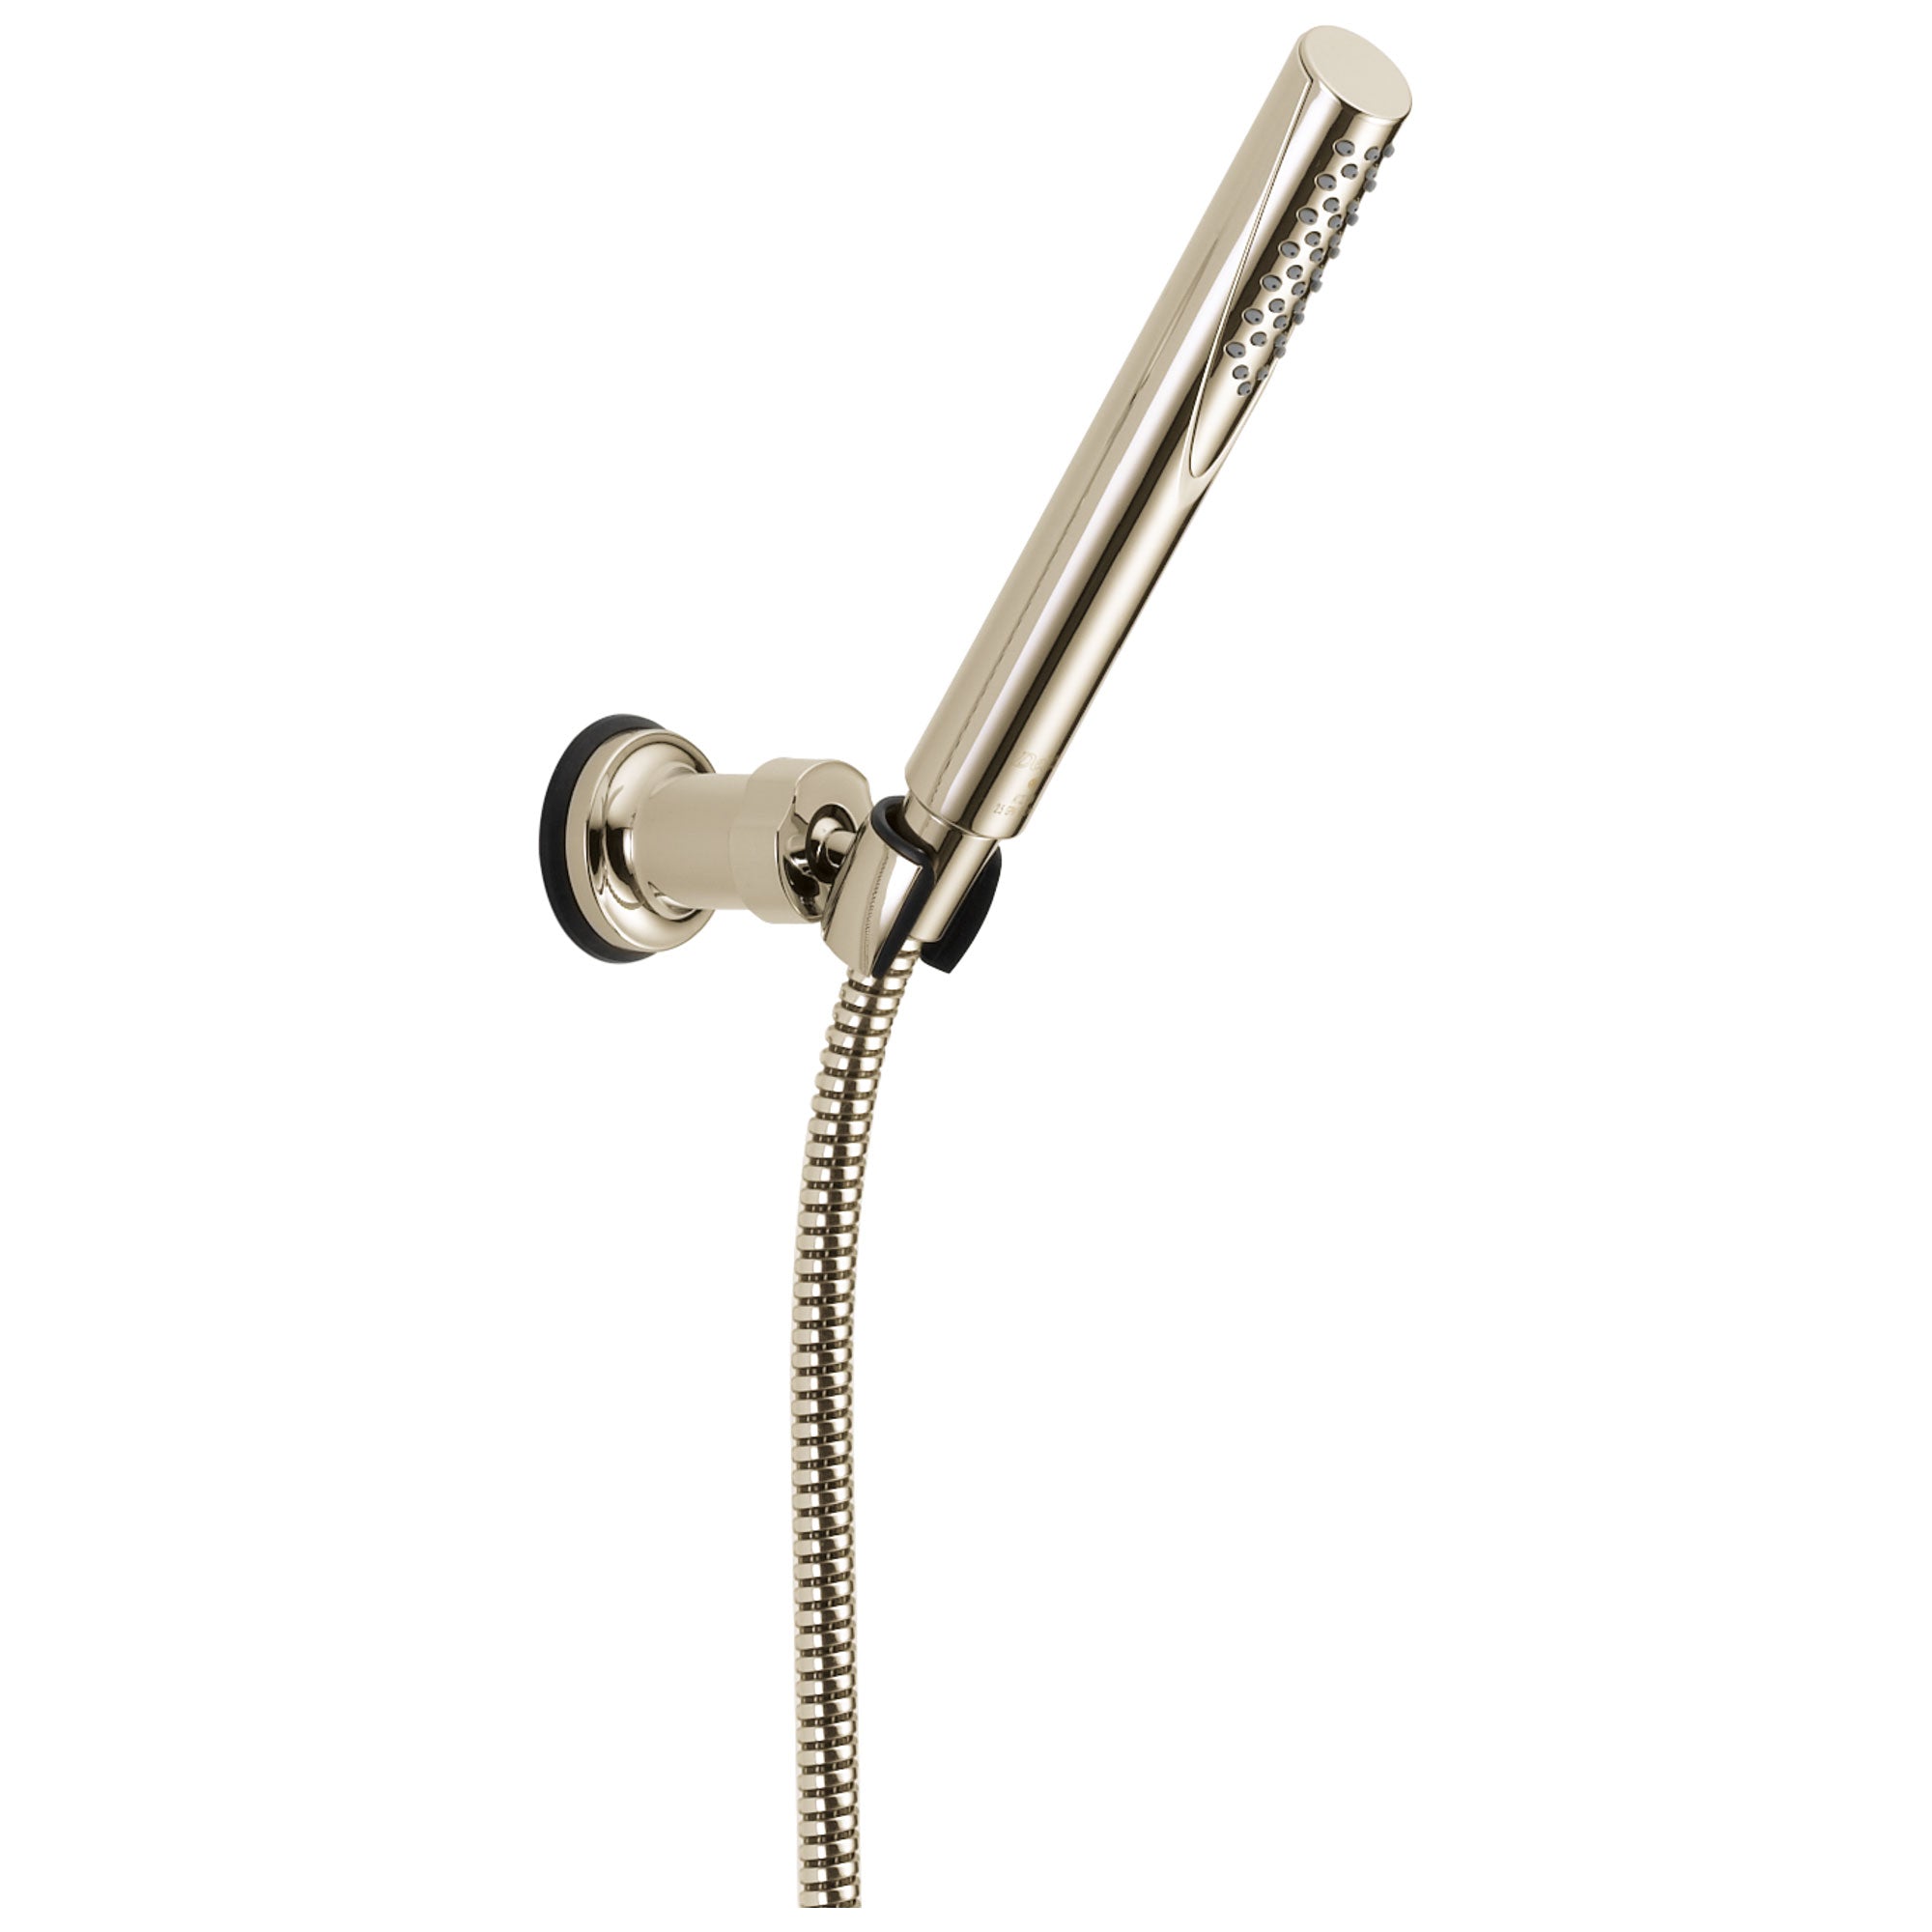 Delta Contemporary Polished Nickel Finish Wall-Mount Hand Shower with Wall Bracket and Hose D55085PN